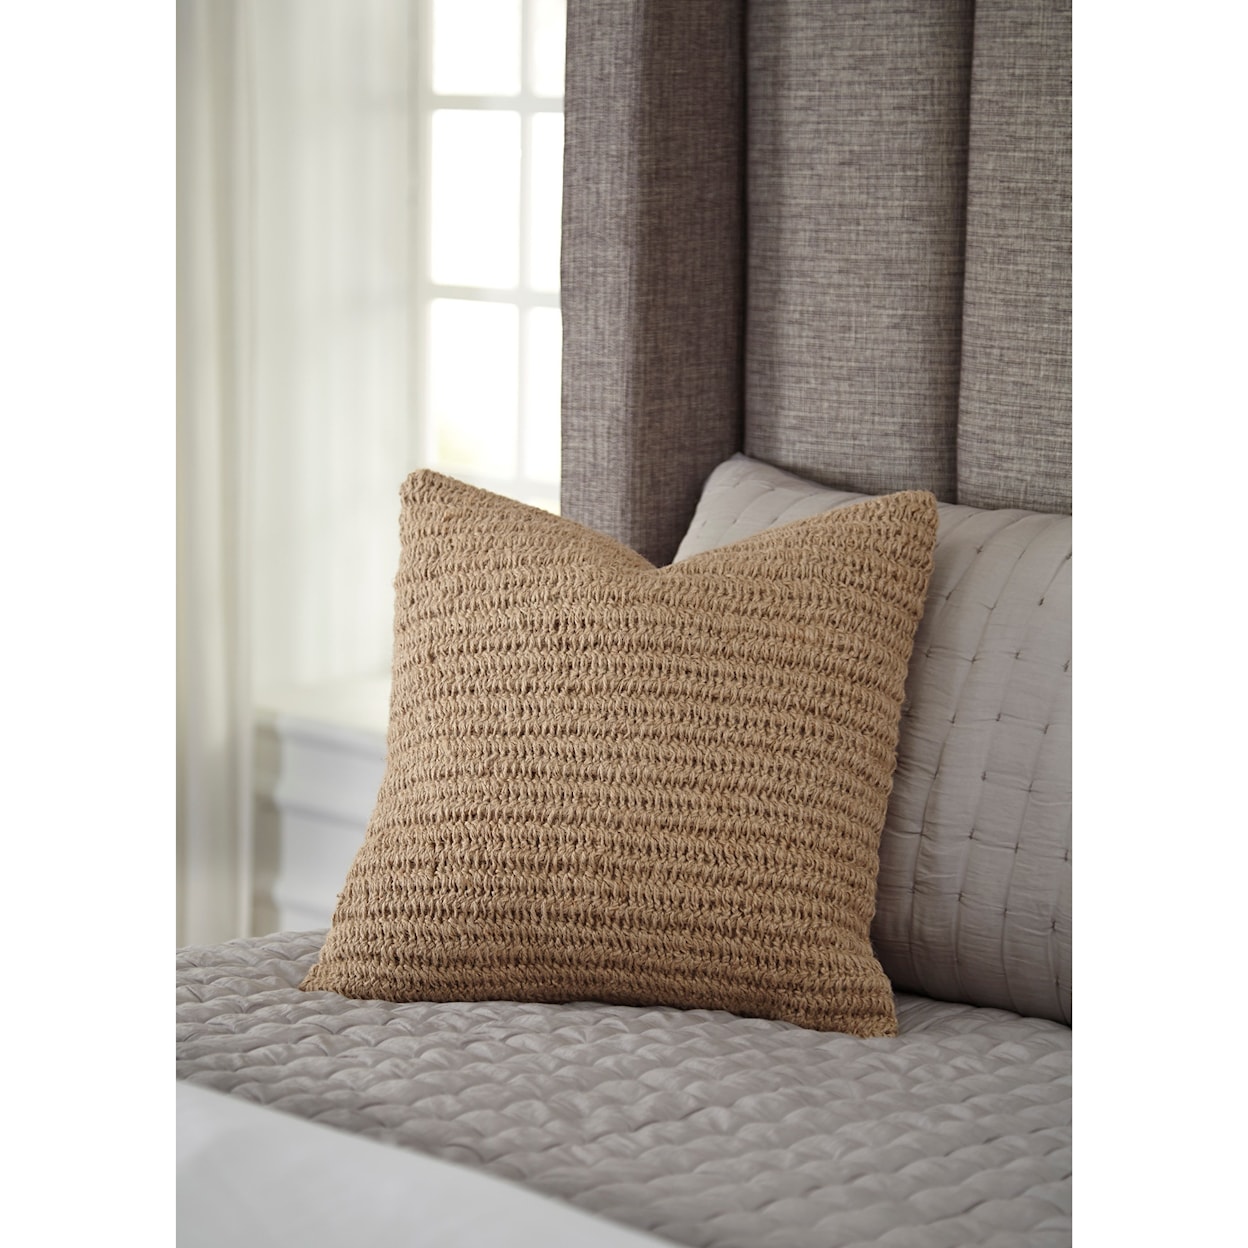 Signature Design by Ashley Furniture Pillows Tryton - Natural Pillow Cover